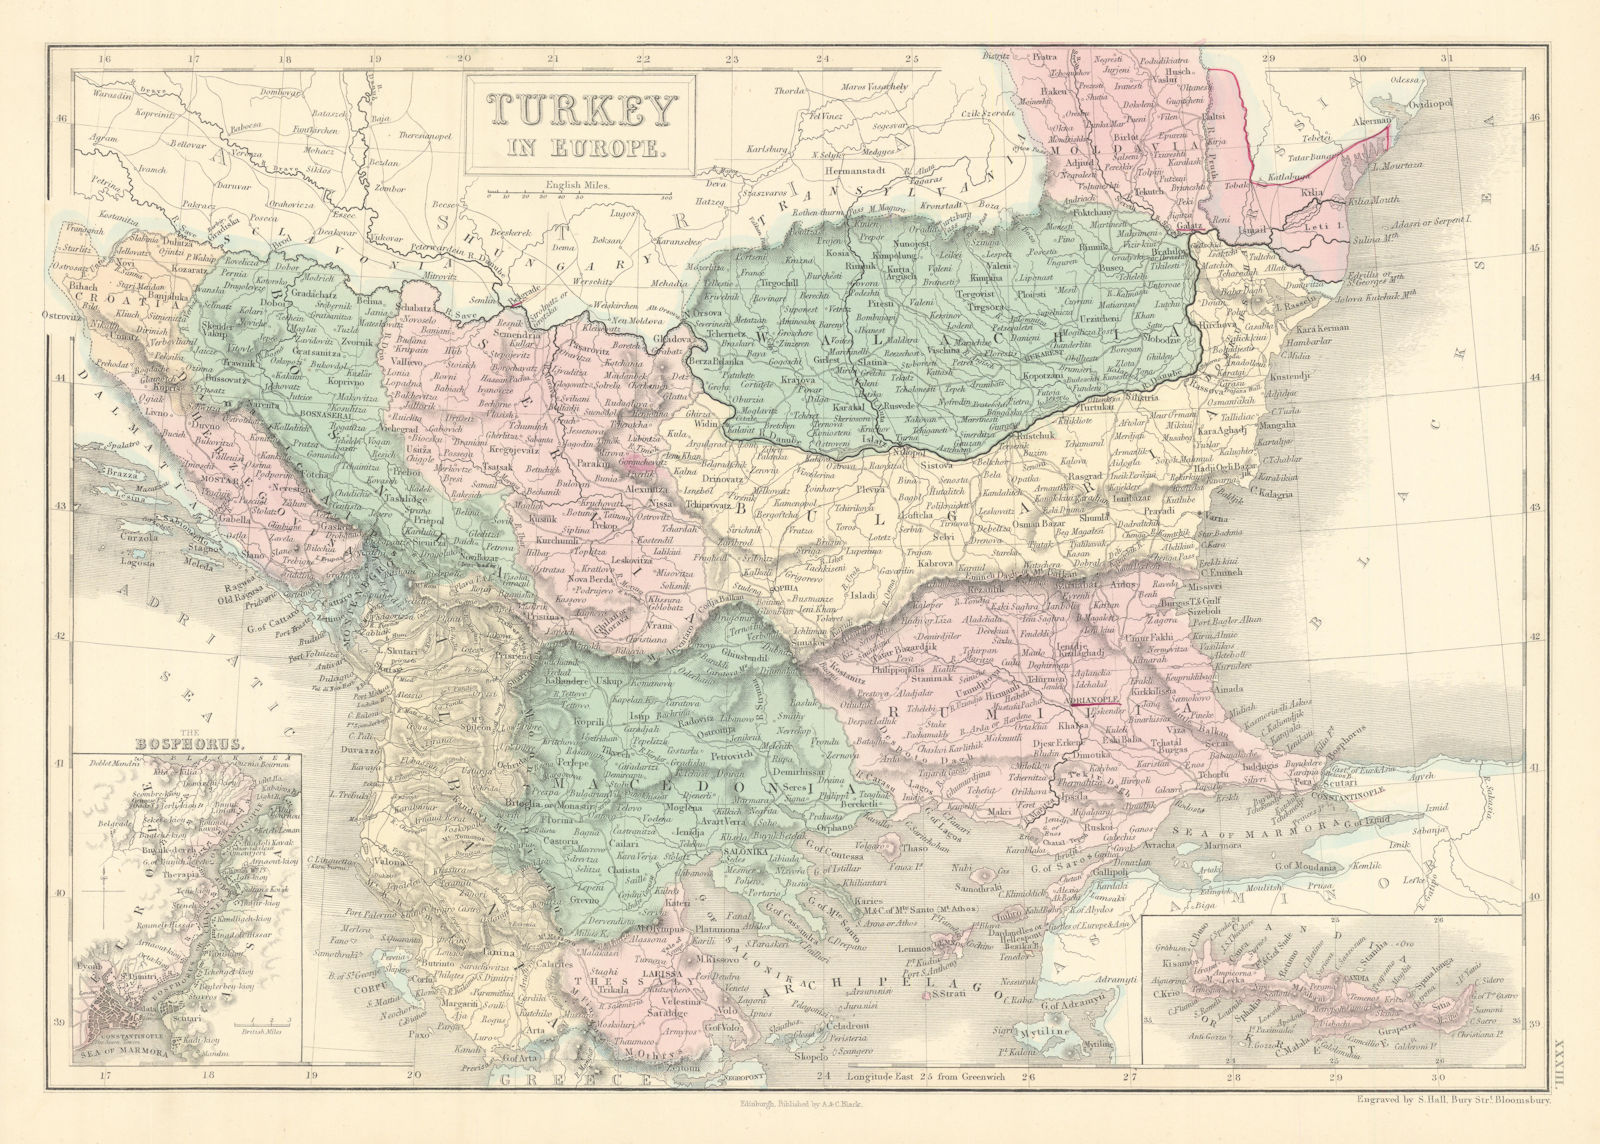 Associate Product Turkey in Europe. Inset The Bosphorus. Balkans. SIDNEY HALL 1856 old map